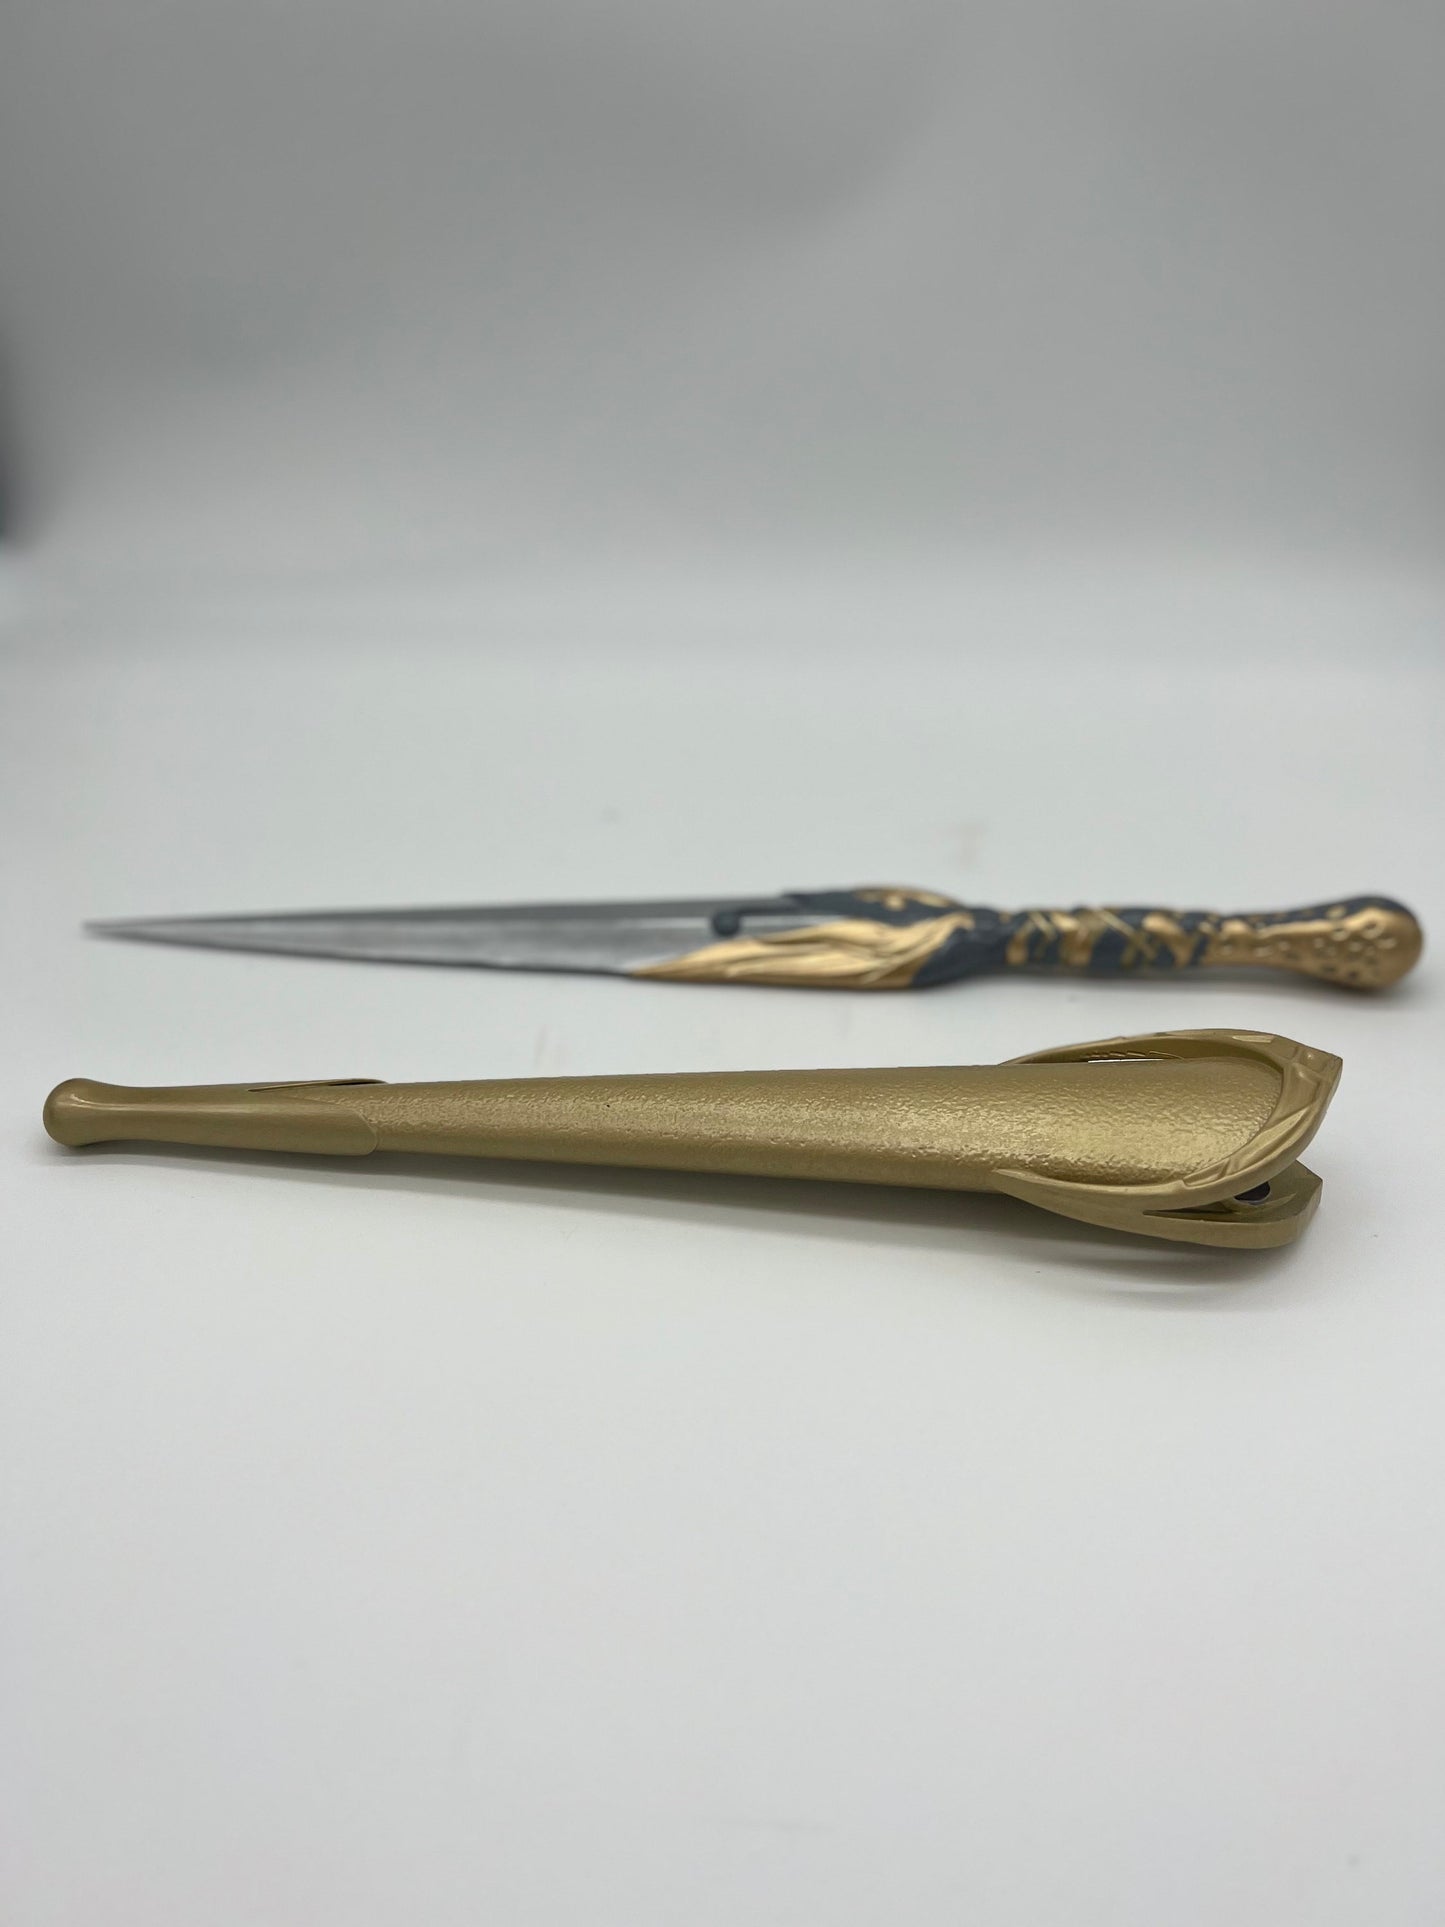 Galadriels Dagger from Rings of Power